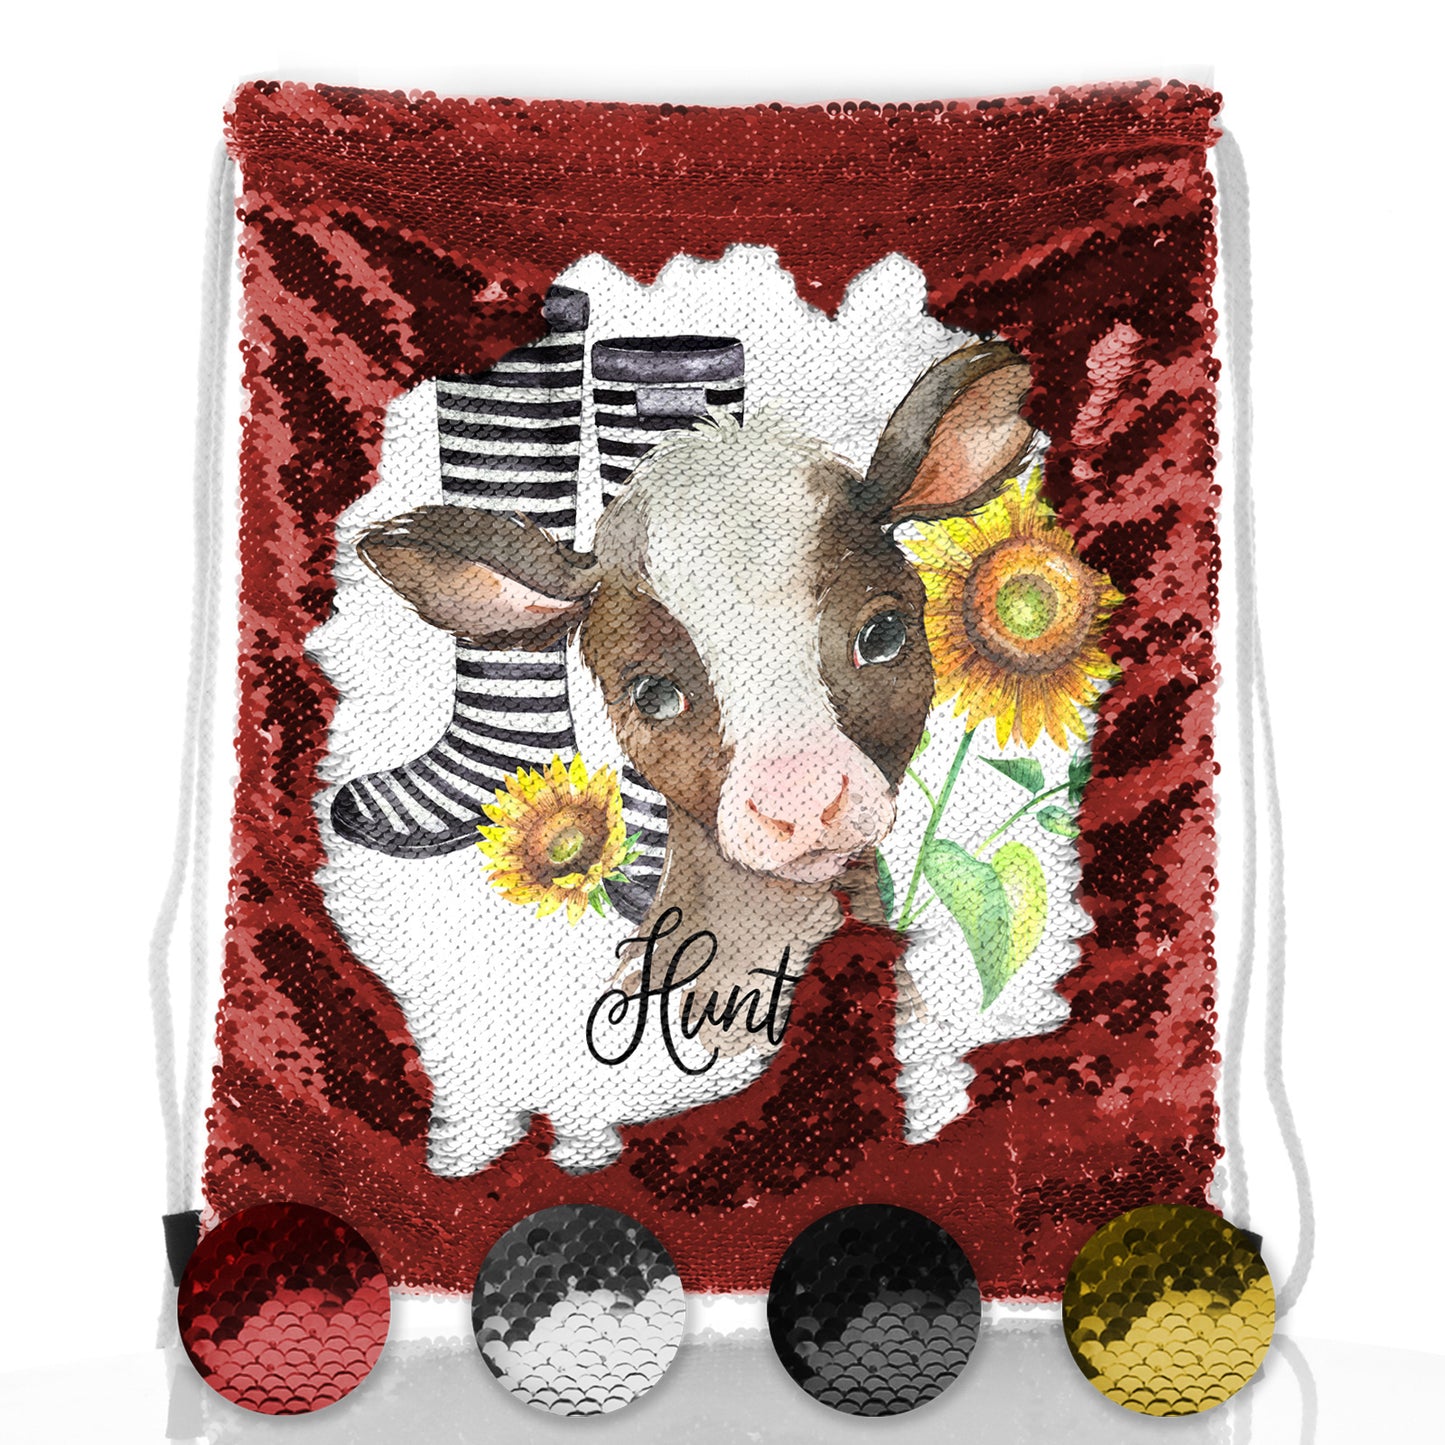 Personalised Sequin Drawstring Backpack with Brown Cow Yellow Sunflowers and Cute Text